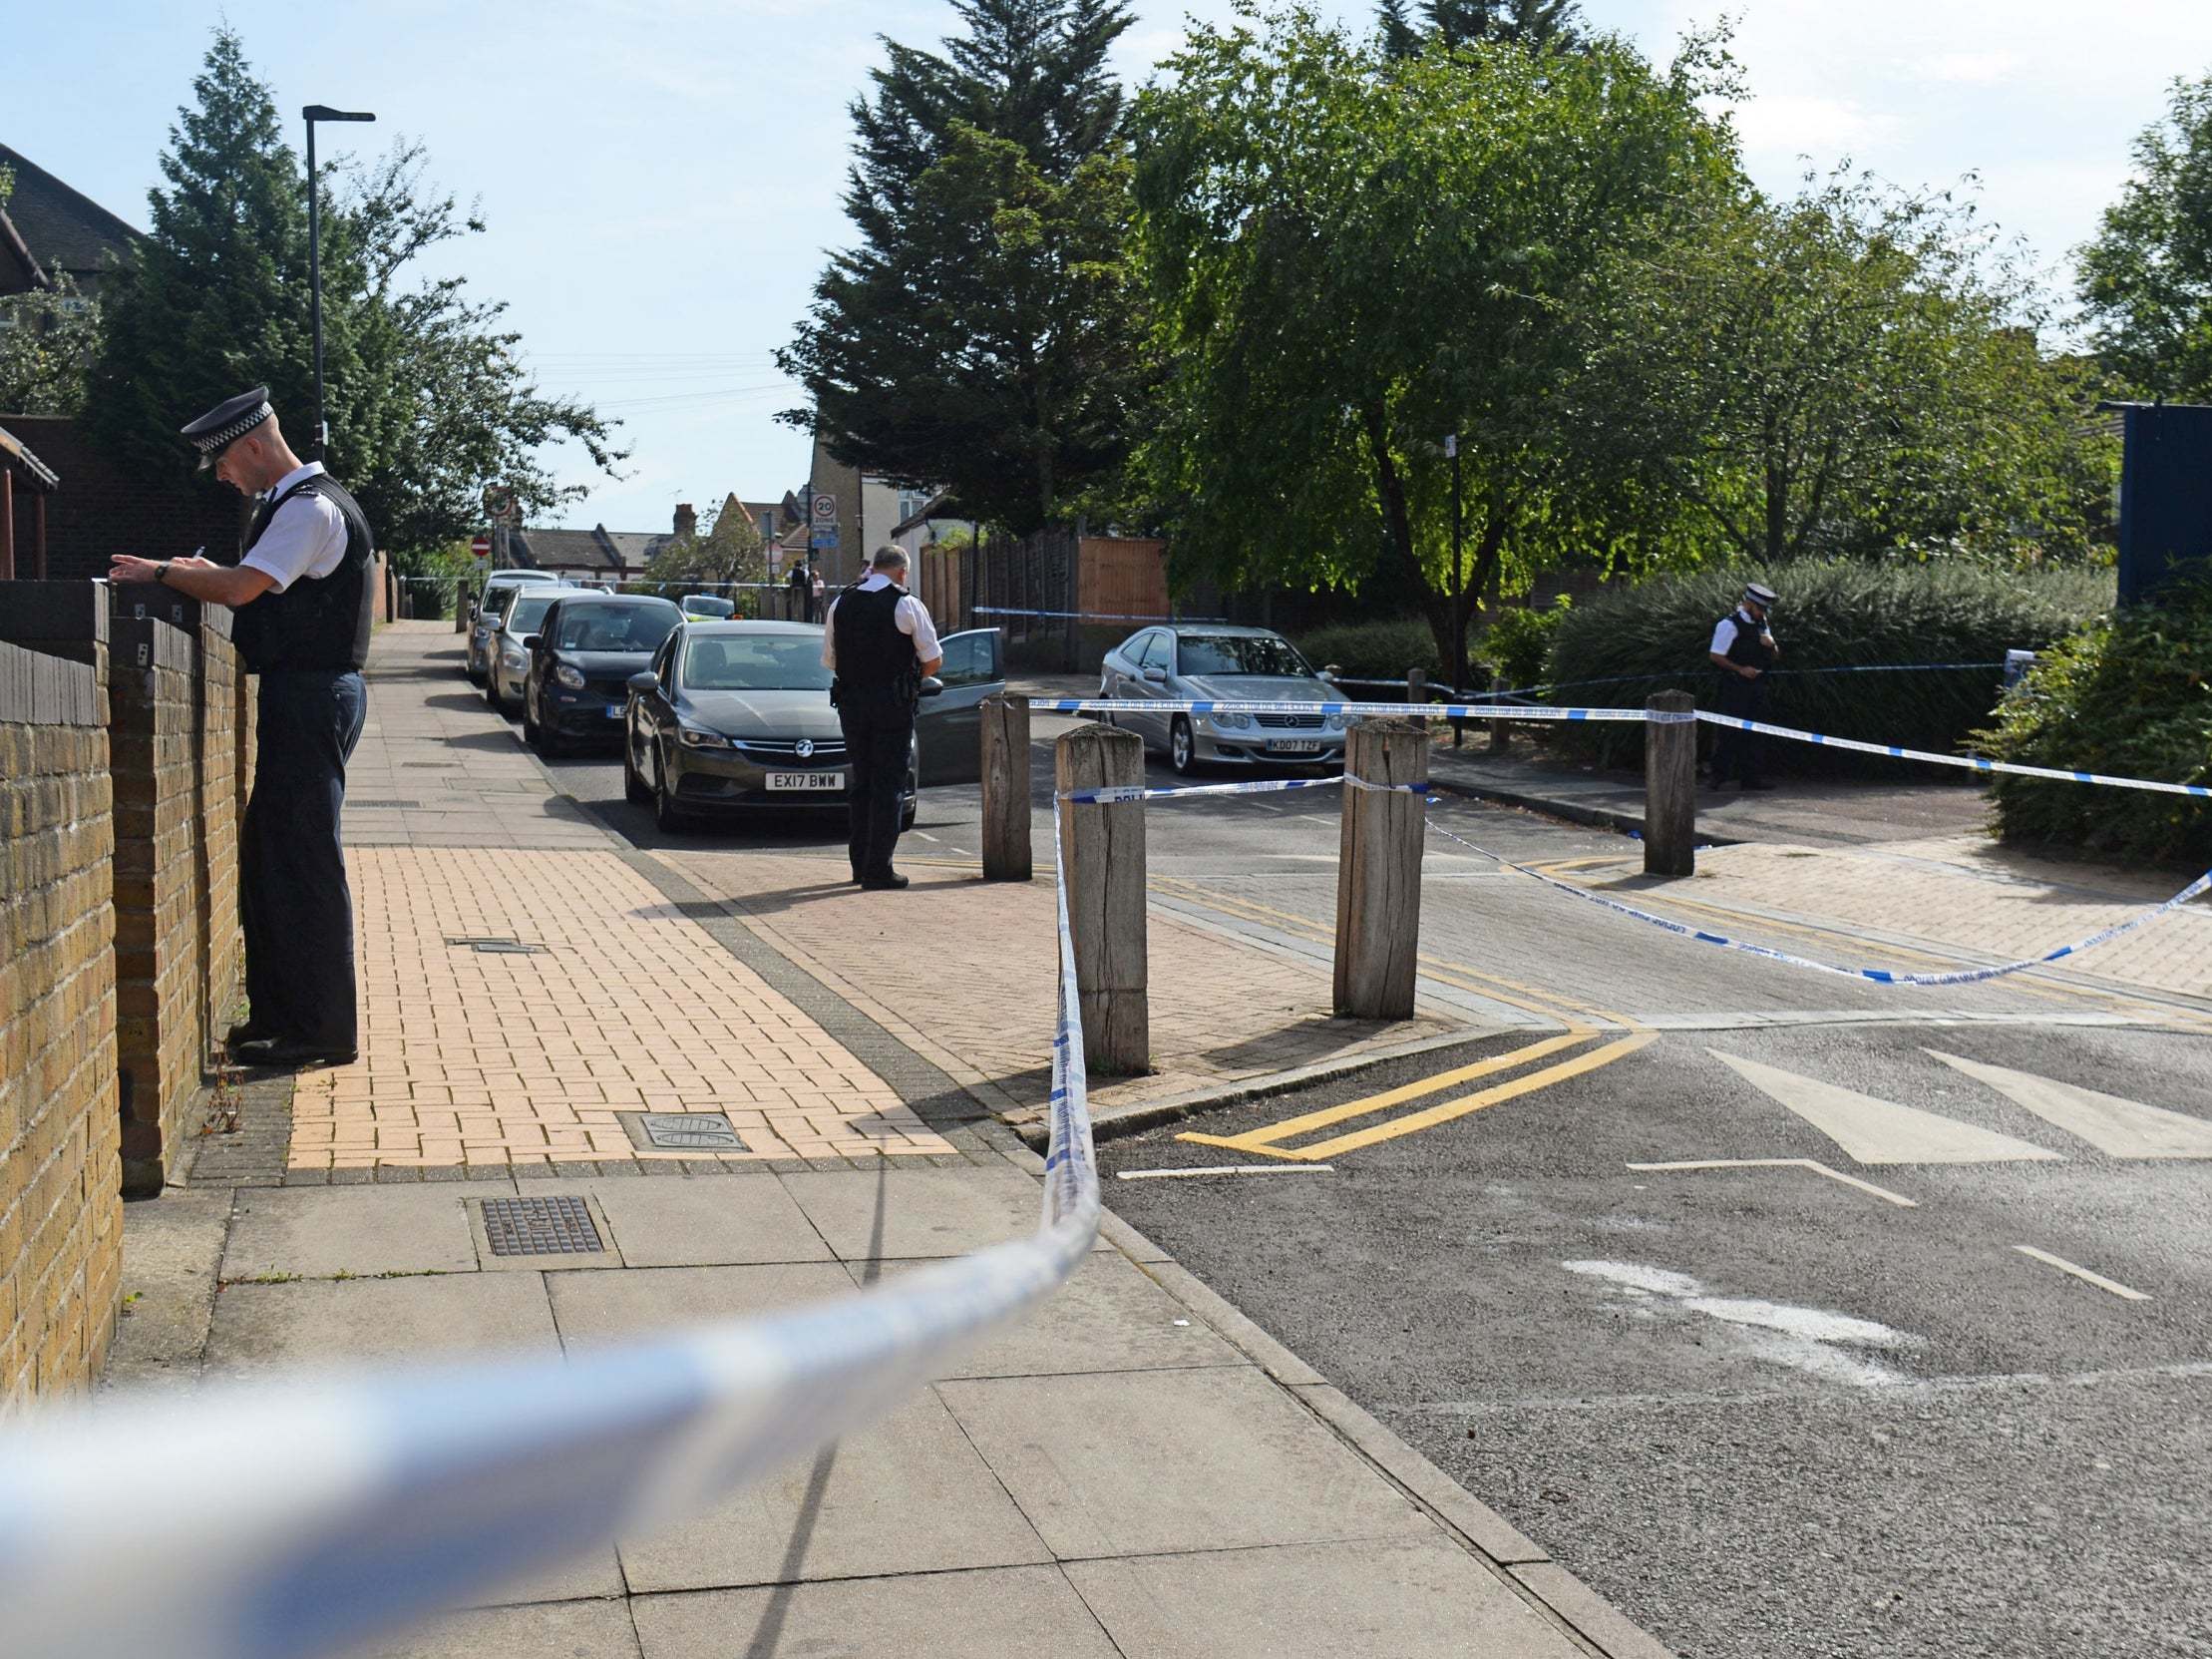 The stabbing on Willan Road, Tottenham, has let a 15 year-old boy fighting for his life